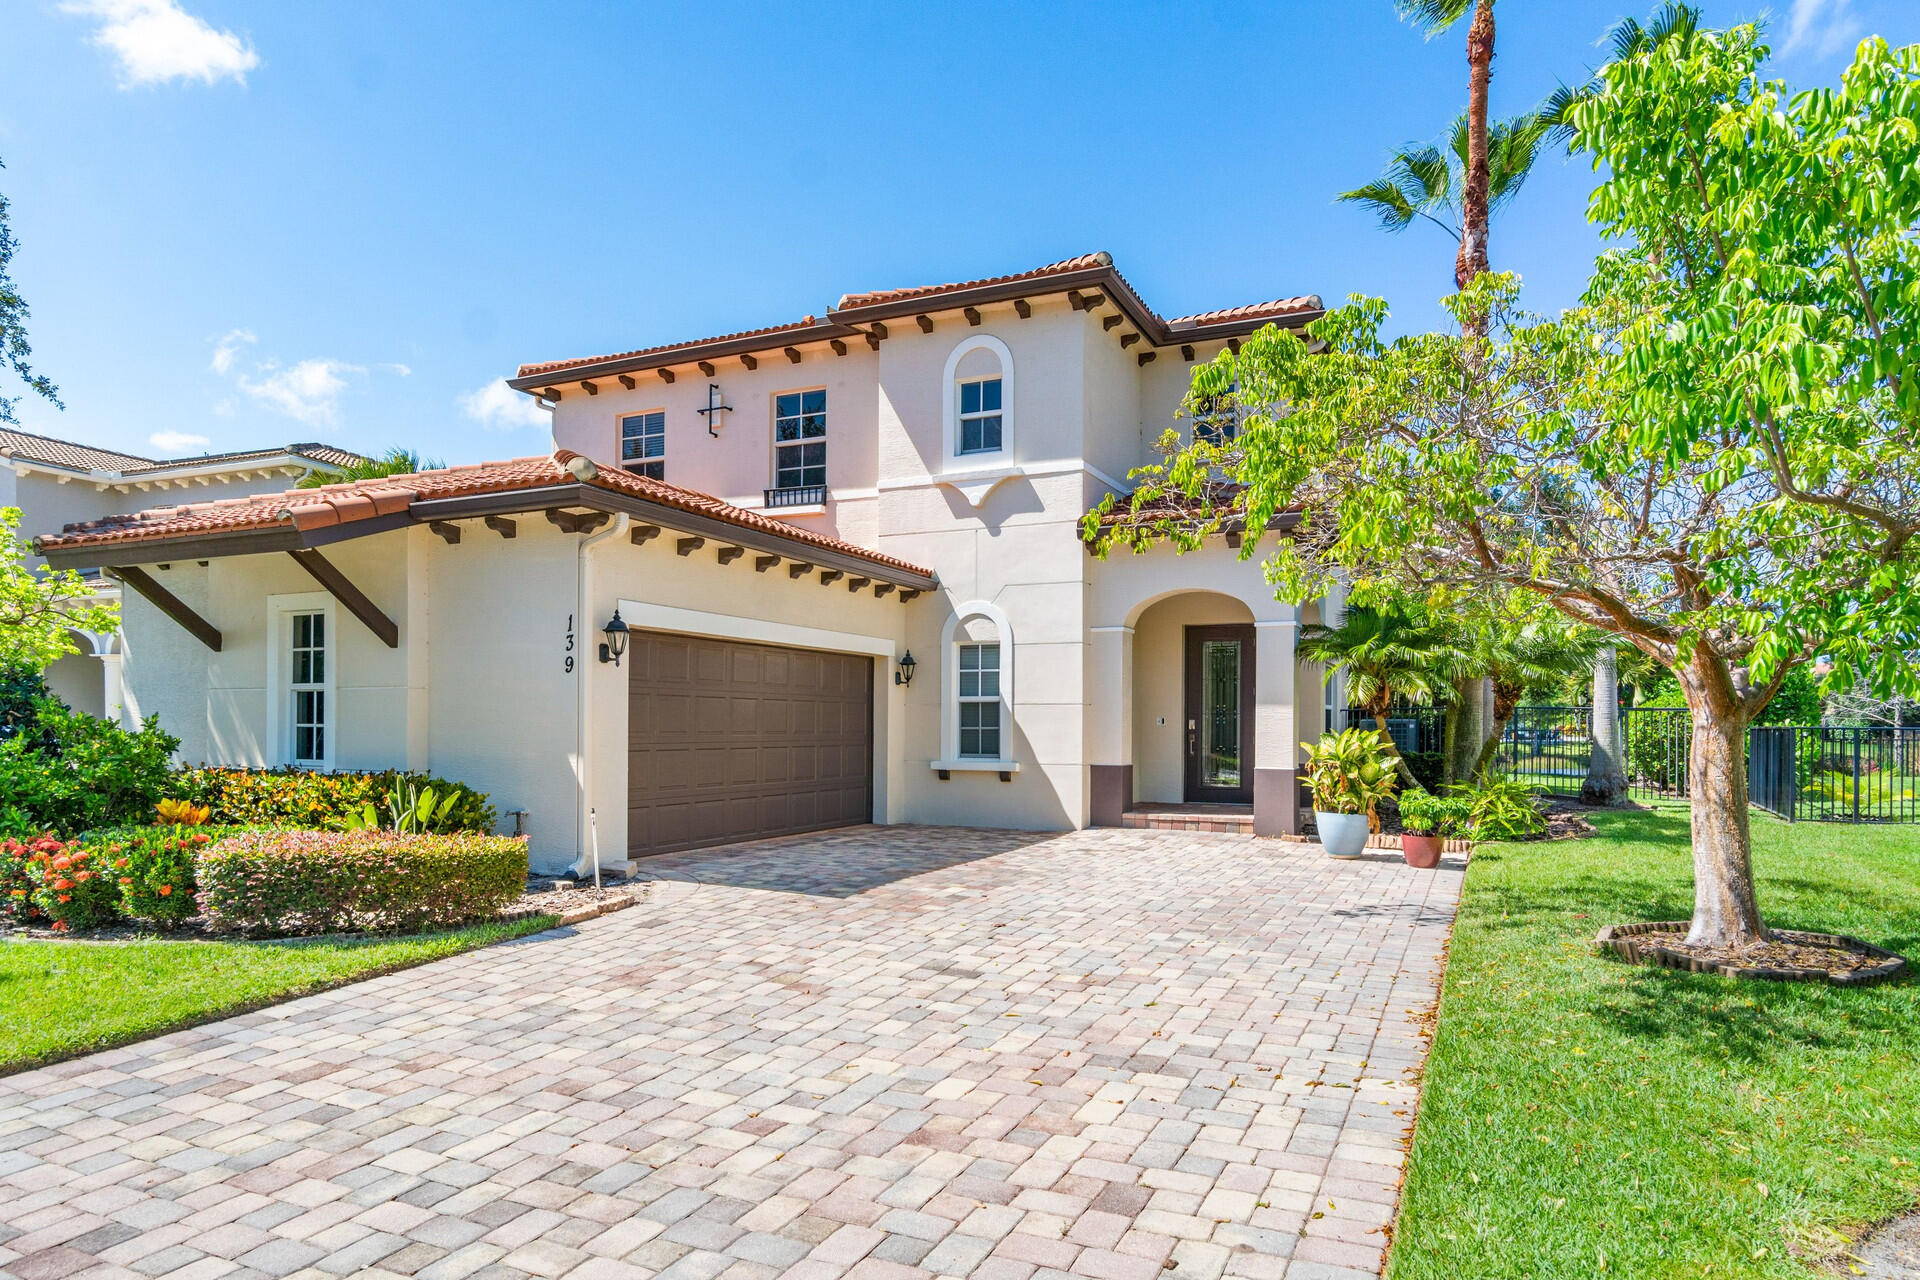 139 Whale Cay Way, Jupiter, Palm Beach County, Florida - 4 Bedrooms  
2.5 Bathrooms - 